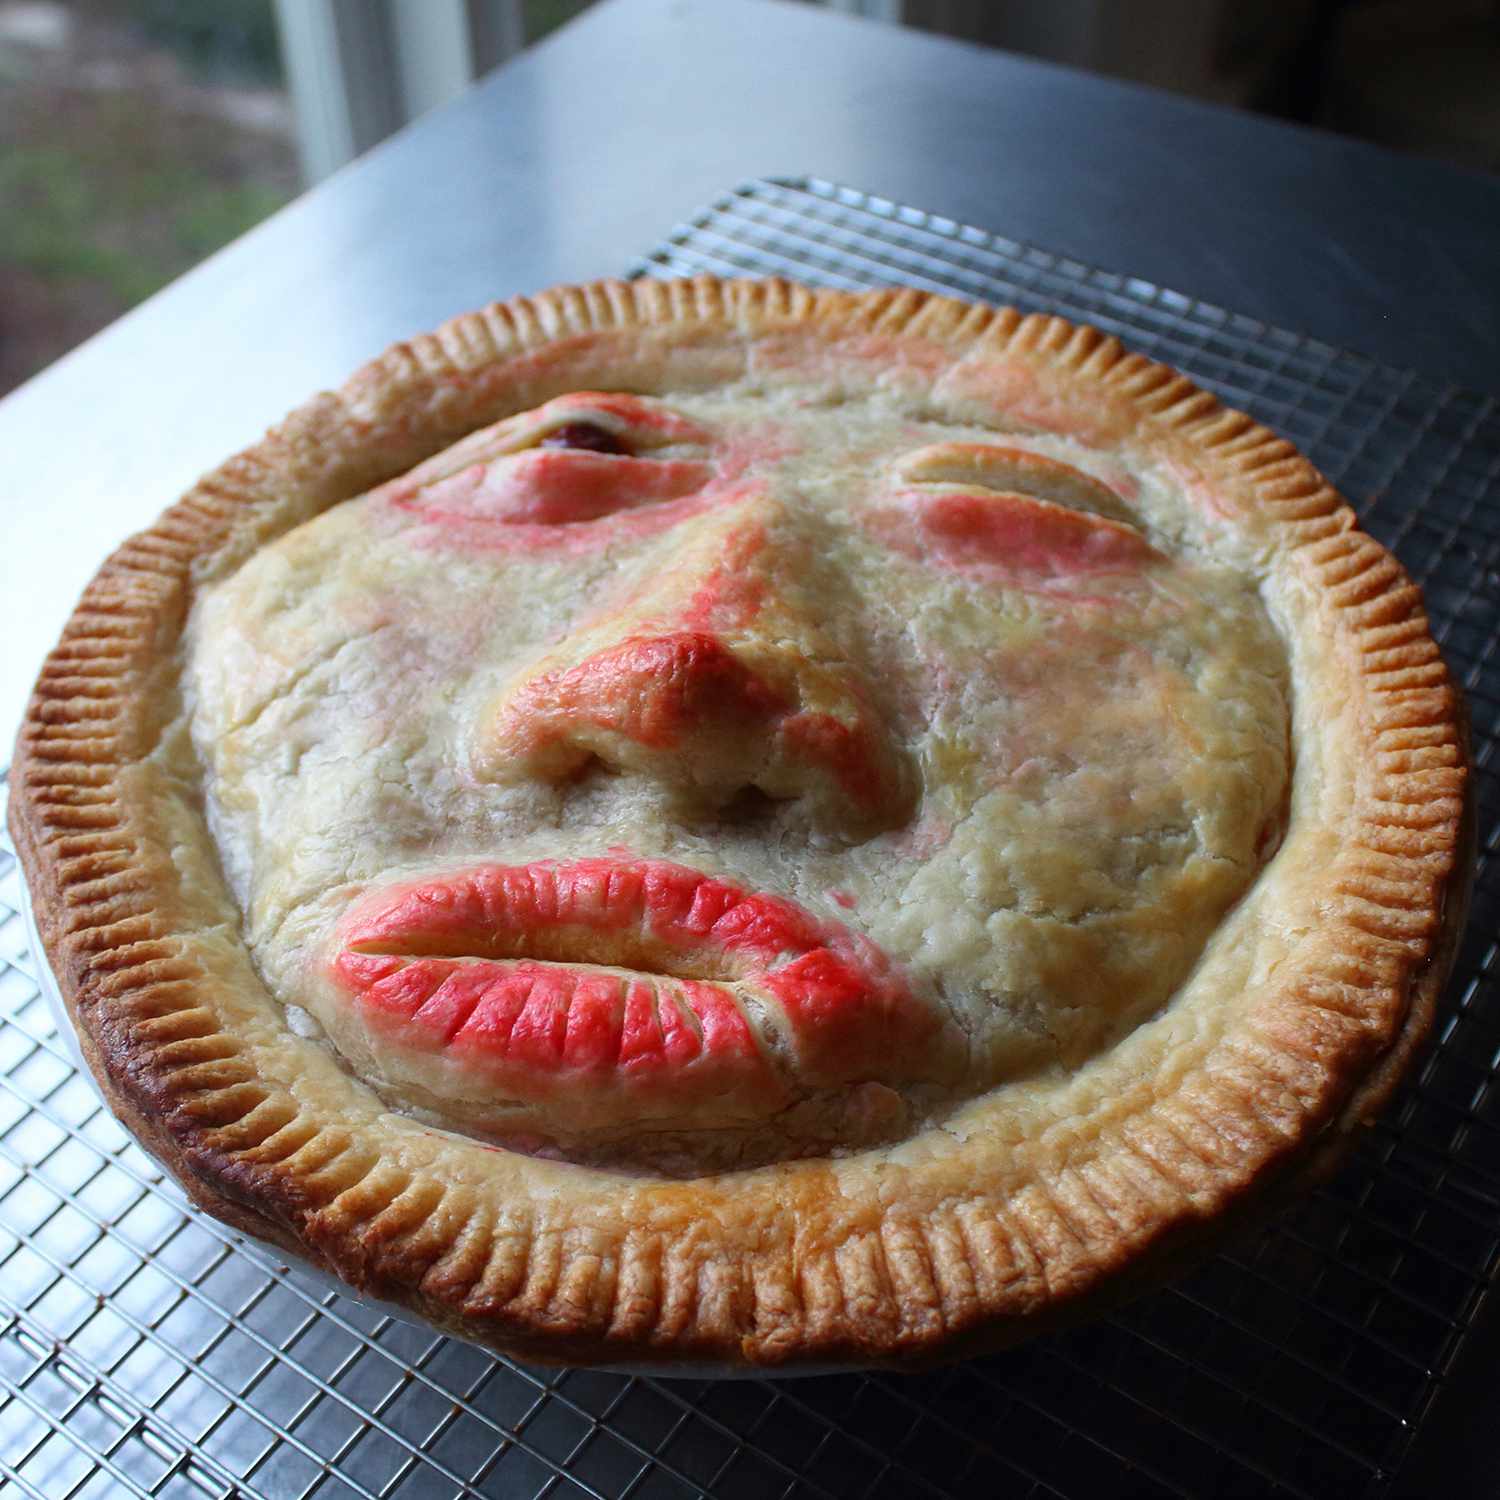 A meat pie for Halloween with a face shaped out of pie crust on a dark background